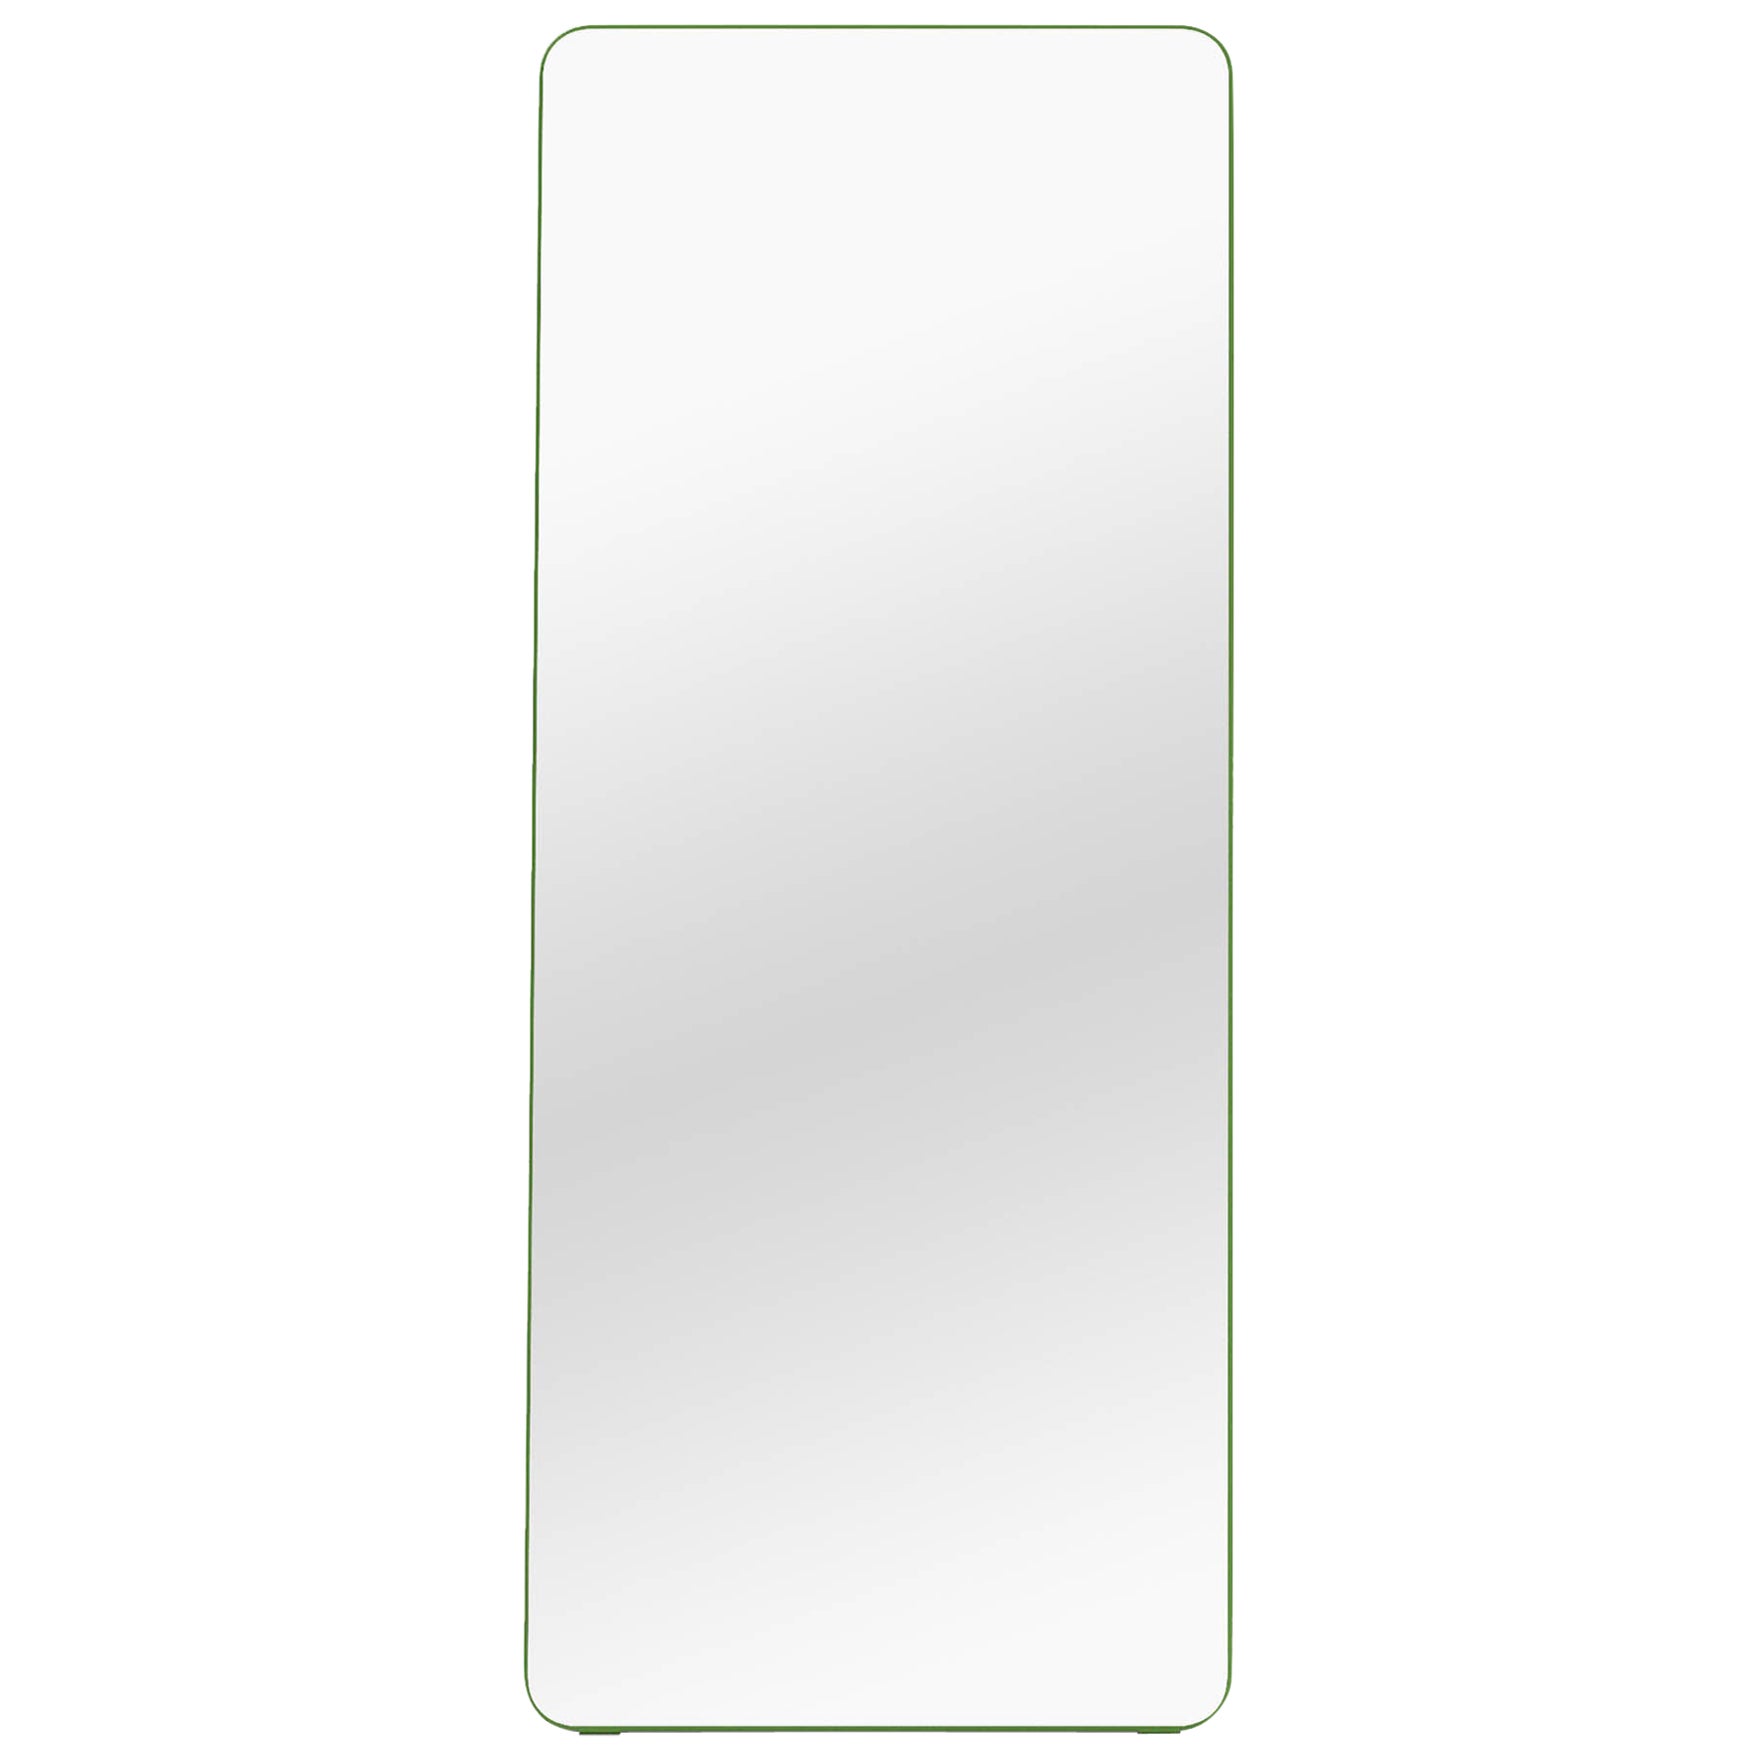 Contemporary Mirror 'Loveself 05' by Oitoproducts, Green Frame For Sale